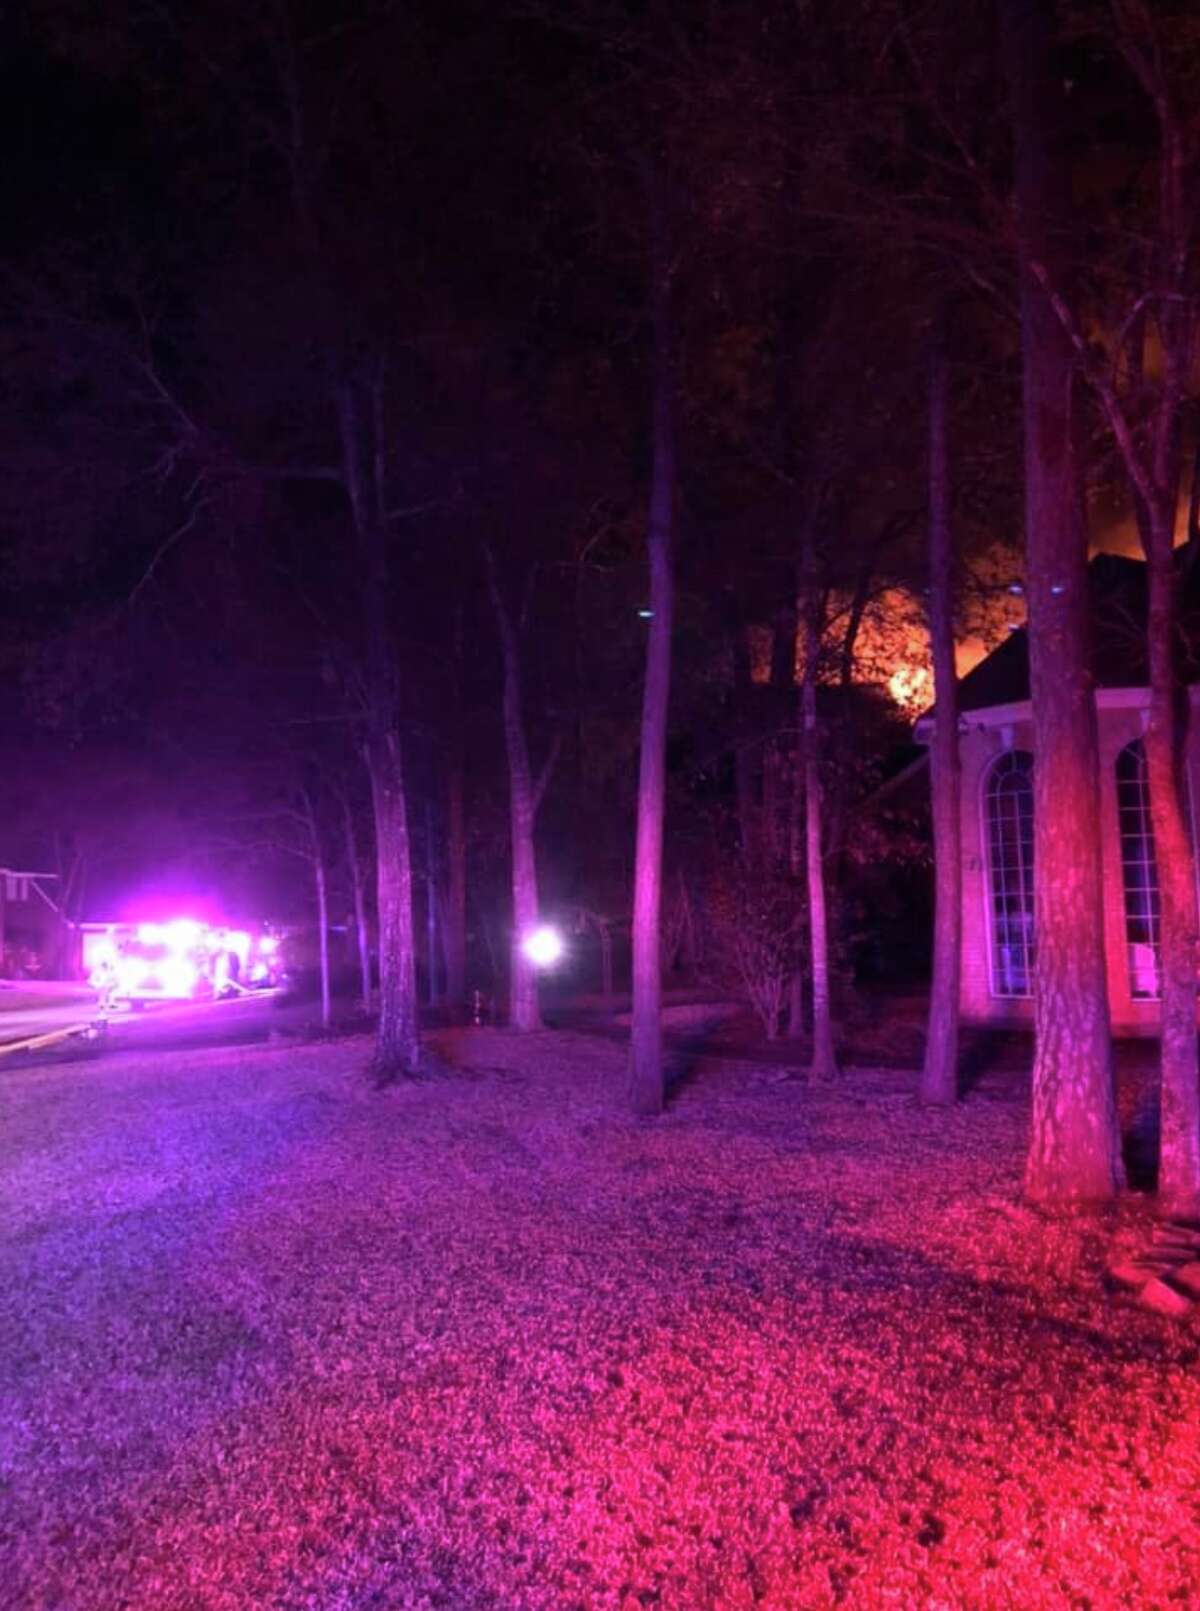 Photos: Fire in The Woodlands burns large home